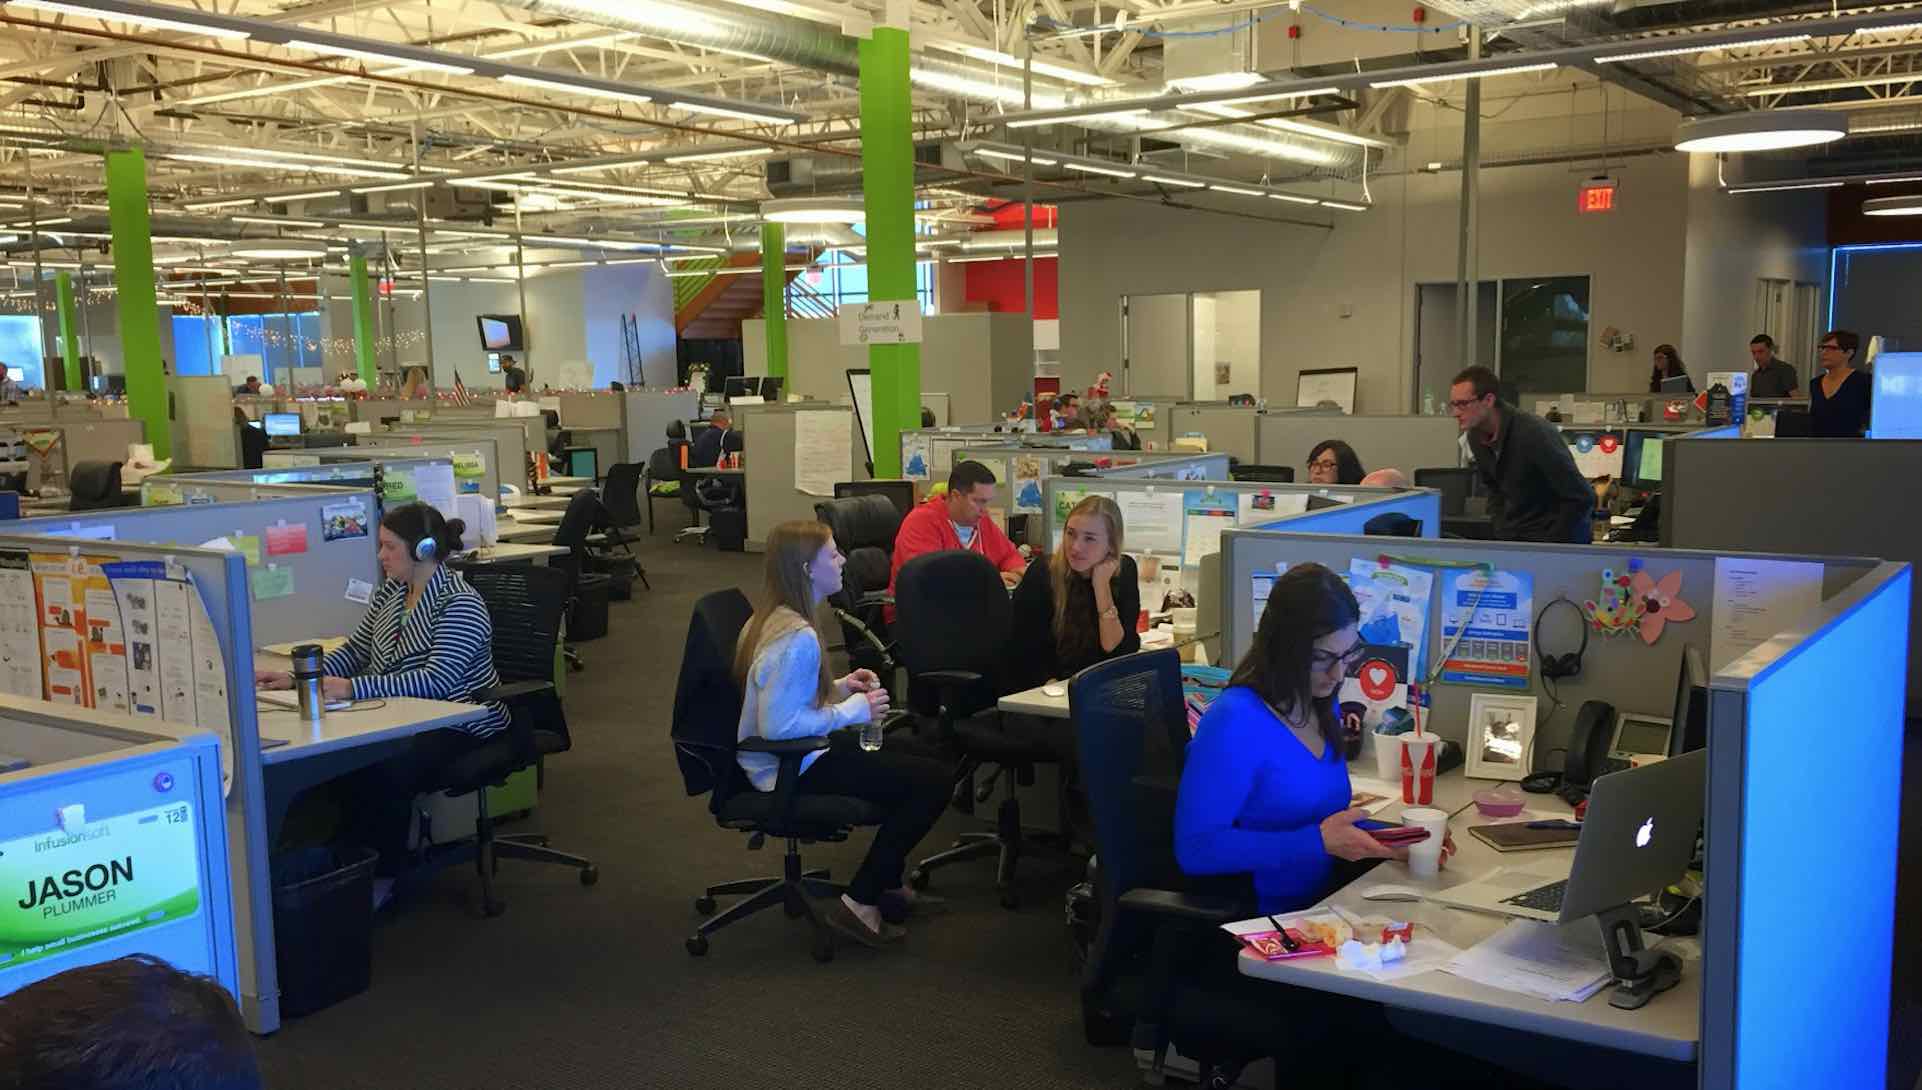 10 Surprising Facts About the Software Industry in Arizona